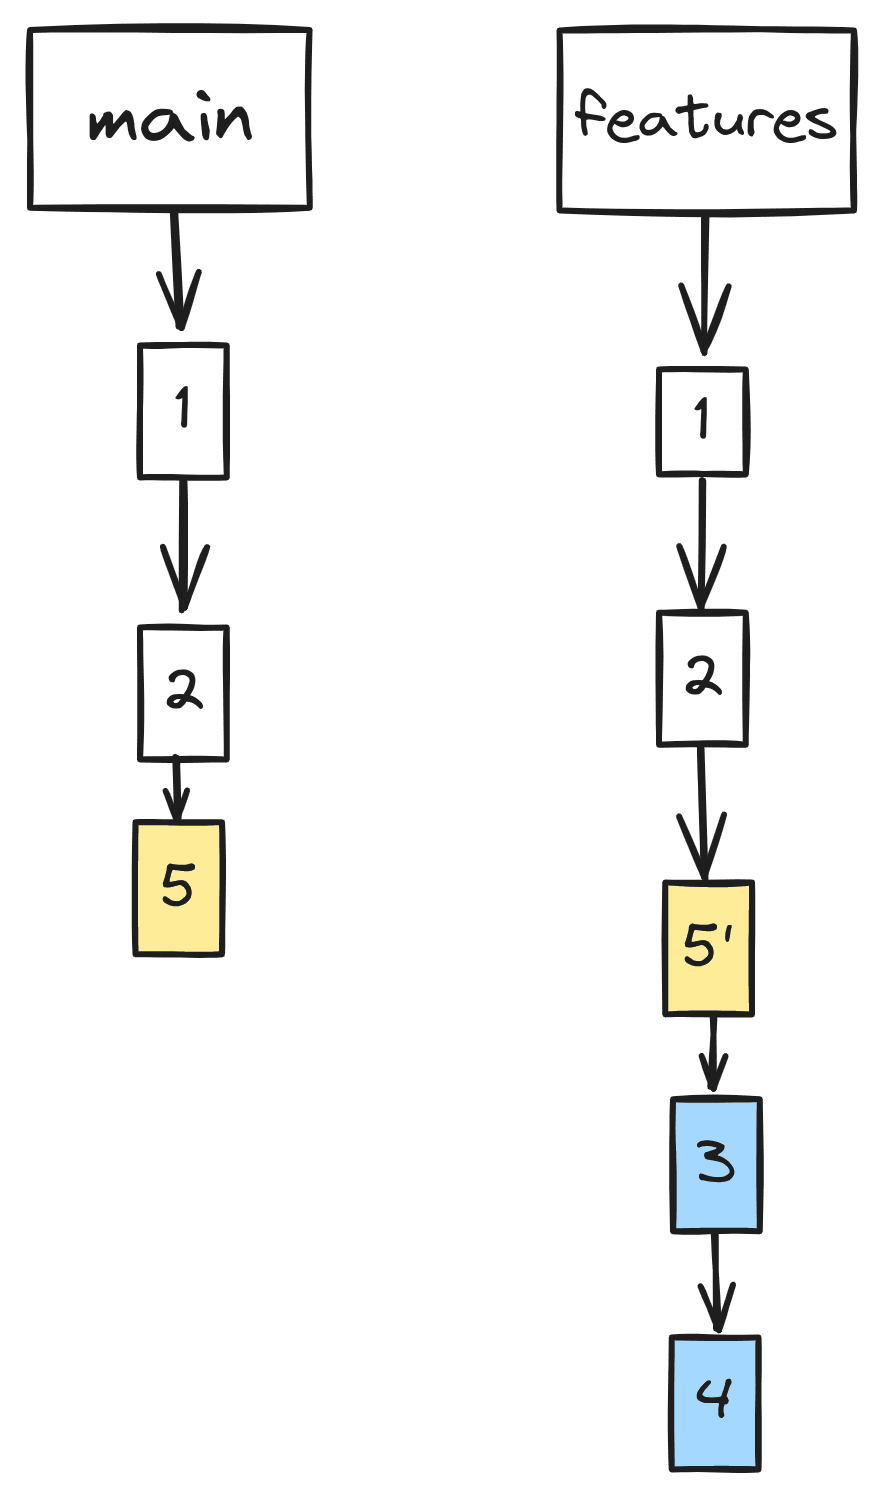 An image illustrating the status of the main and the feature branch after the rebase